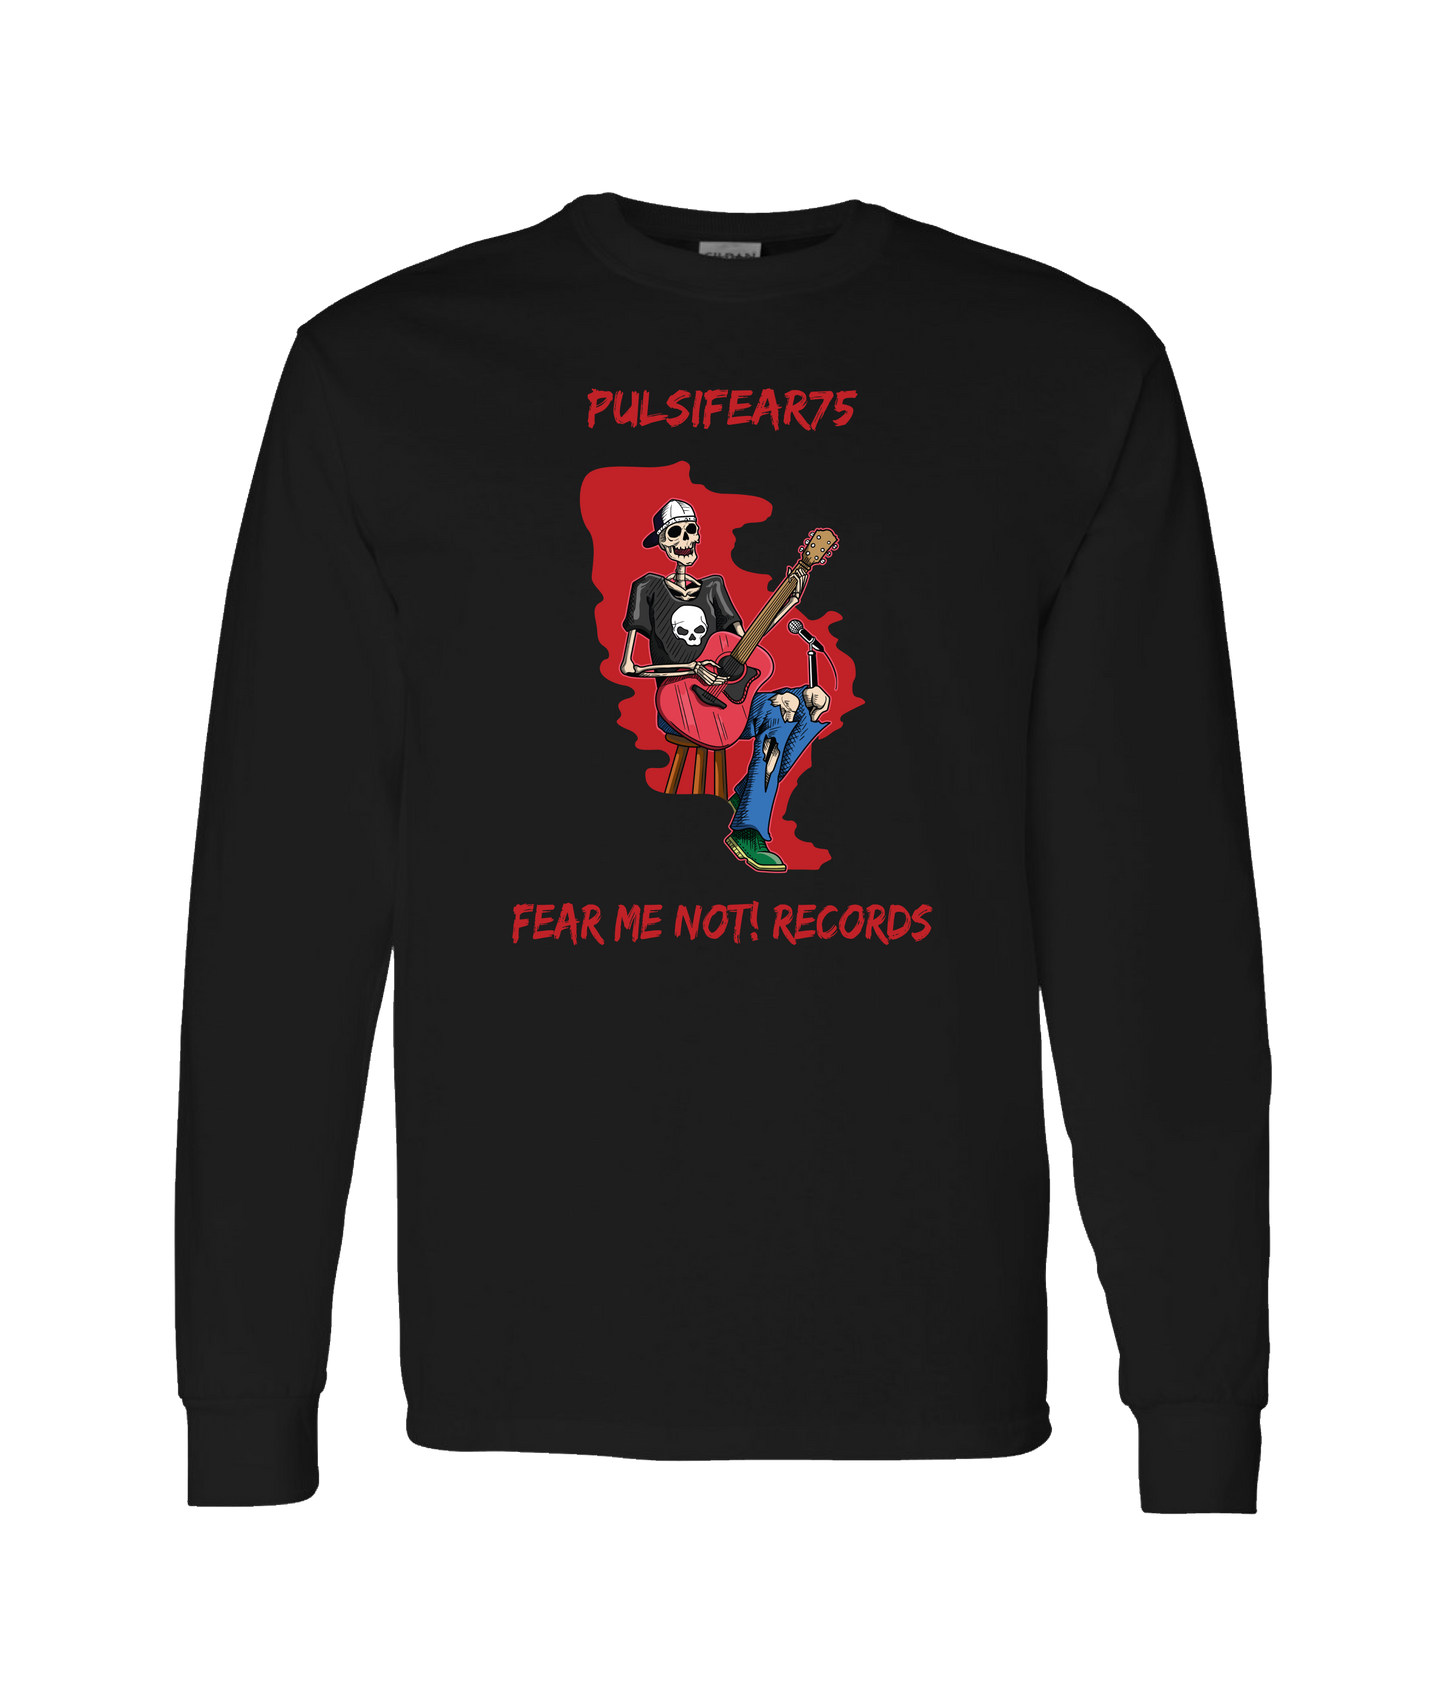 Mark Pulsipher Official - Fear Me Not! Records - Black Long Sleeve T